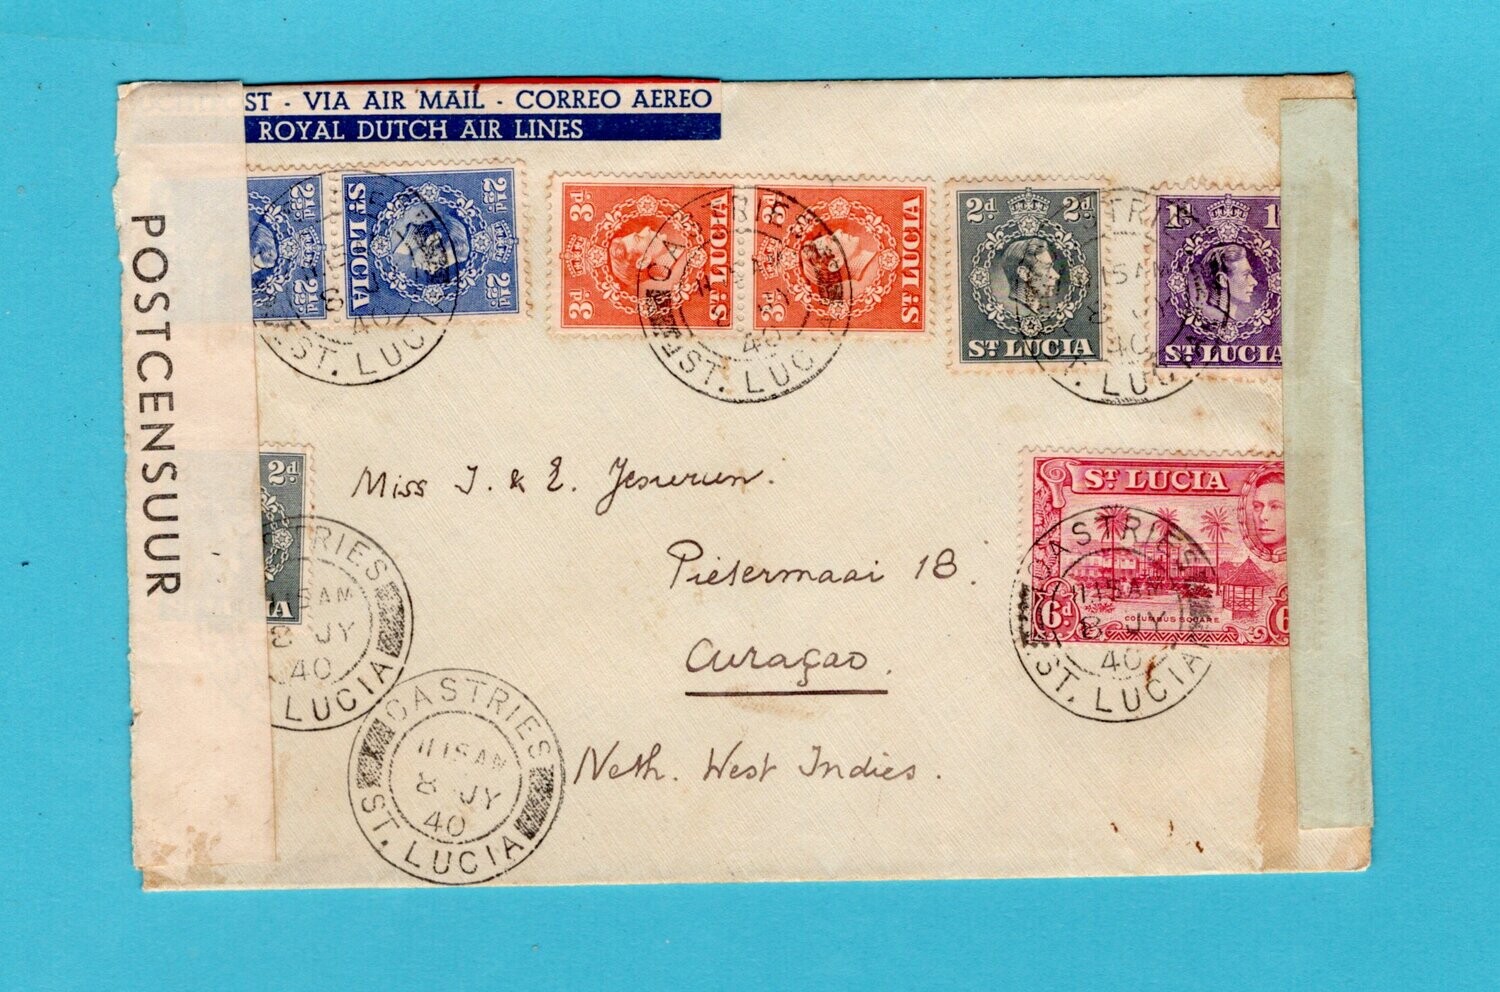 ST LUCIA air double censored cover 1940 Castries to Curaçao